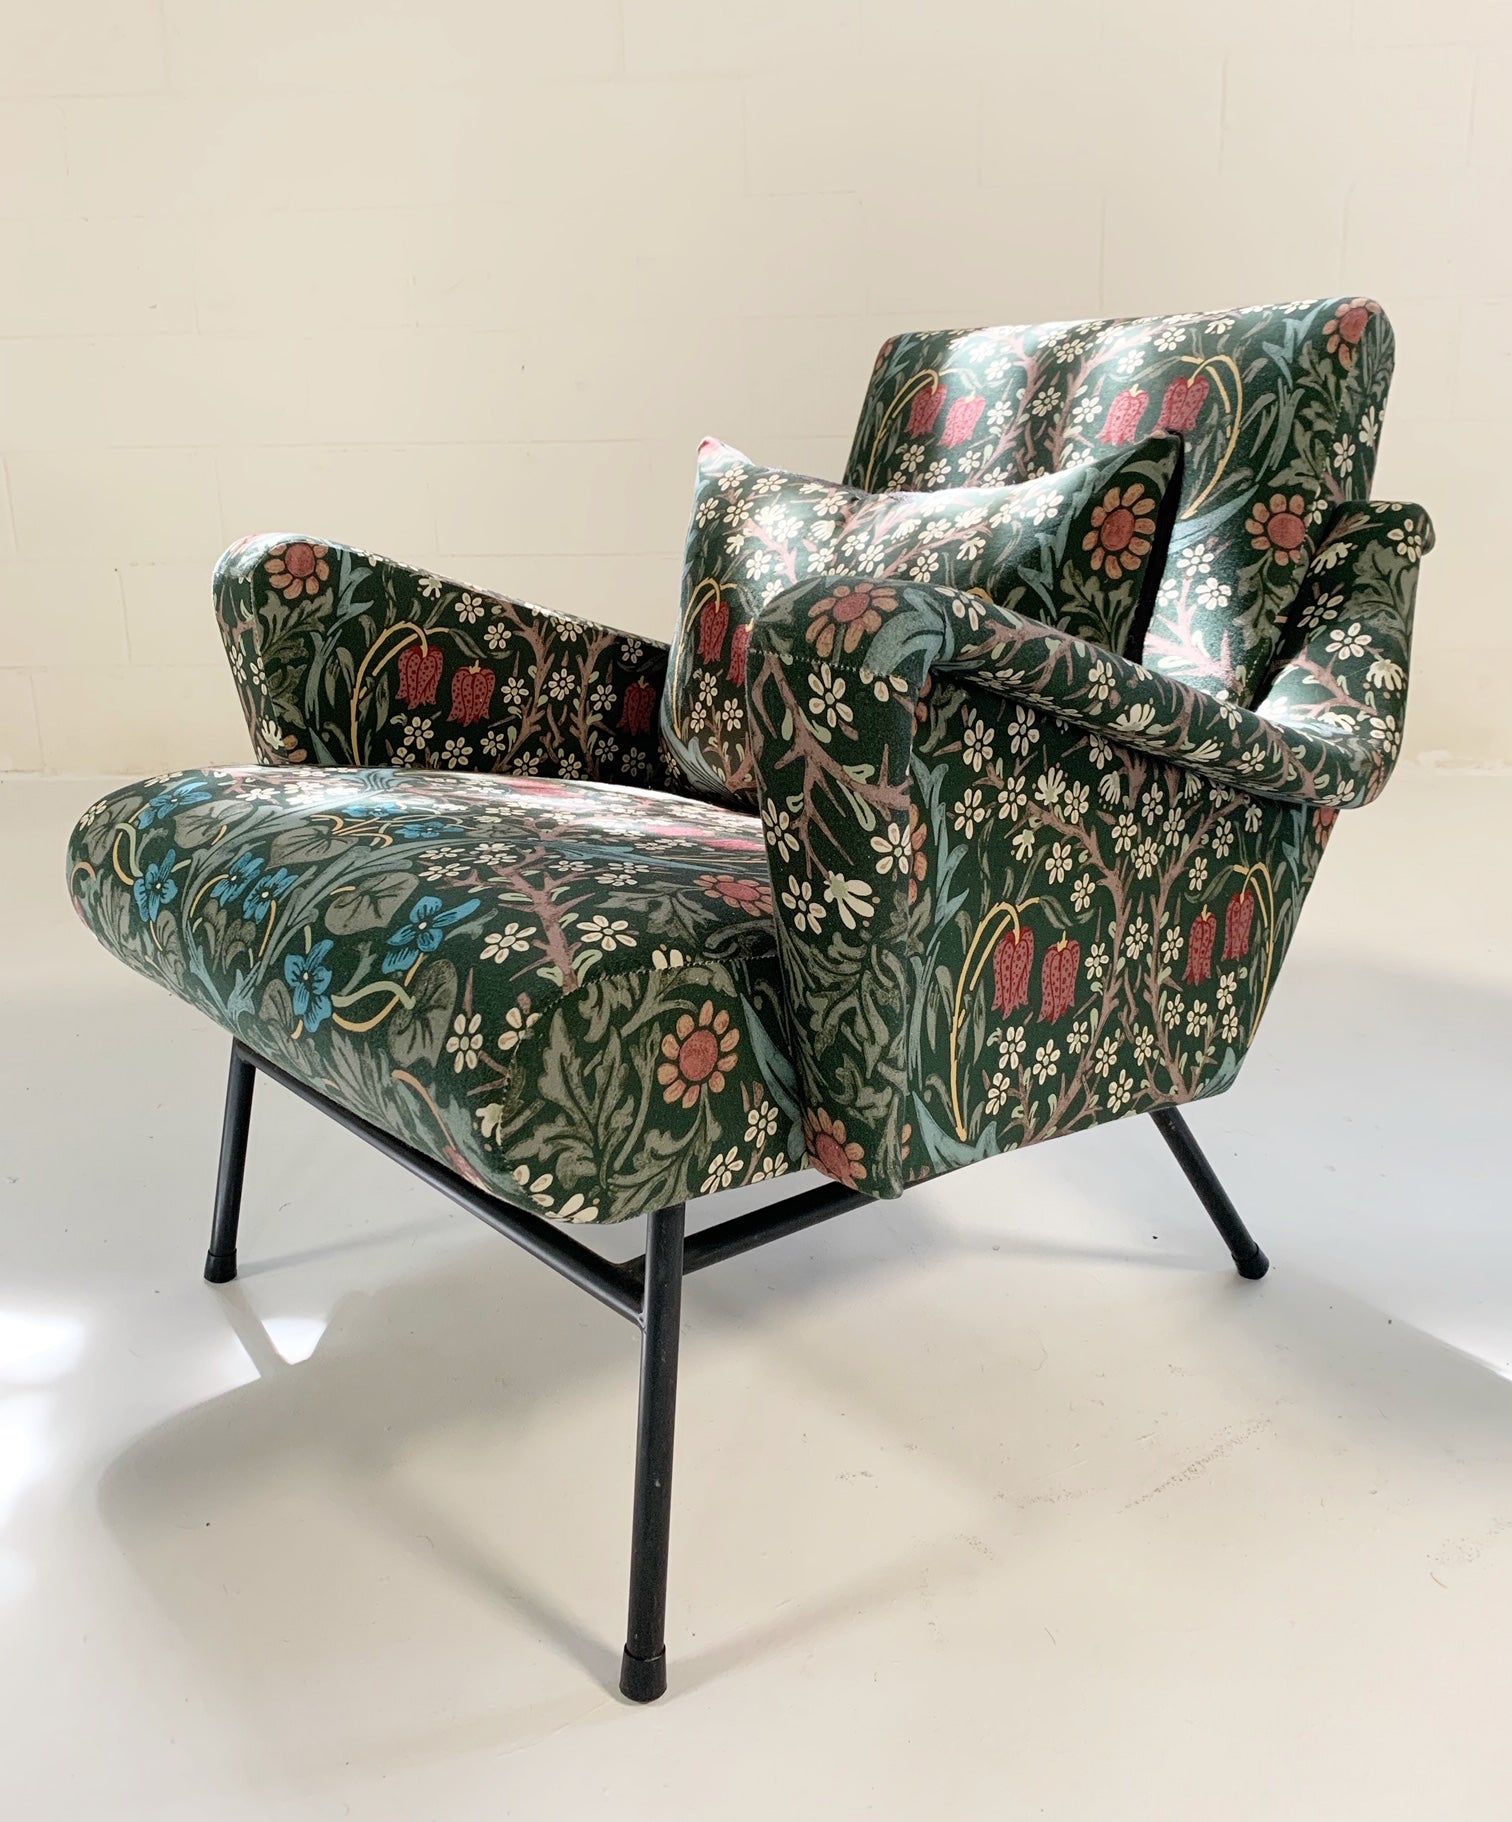 c. 1955 French Lounge Chairs in William Morris Blackthorn, pair - FORSYTH